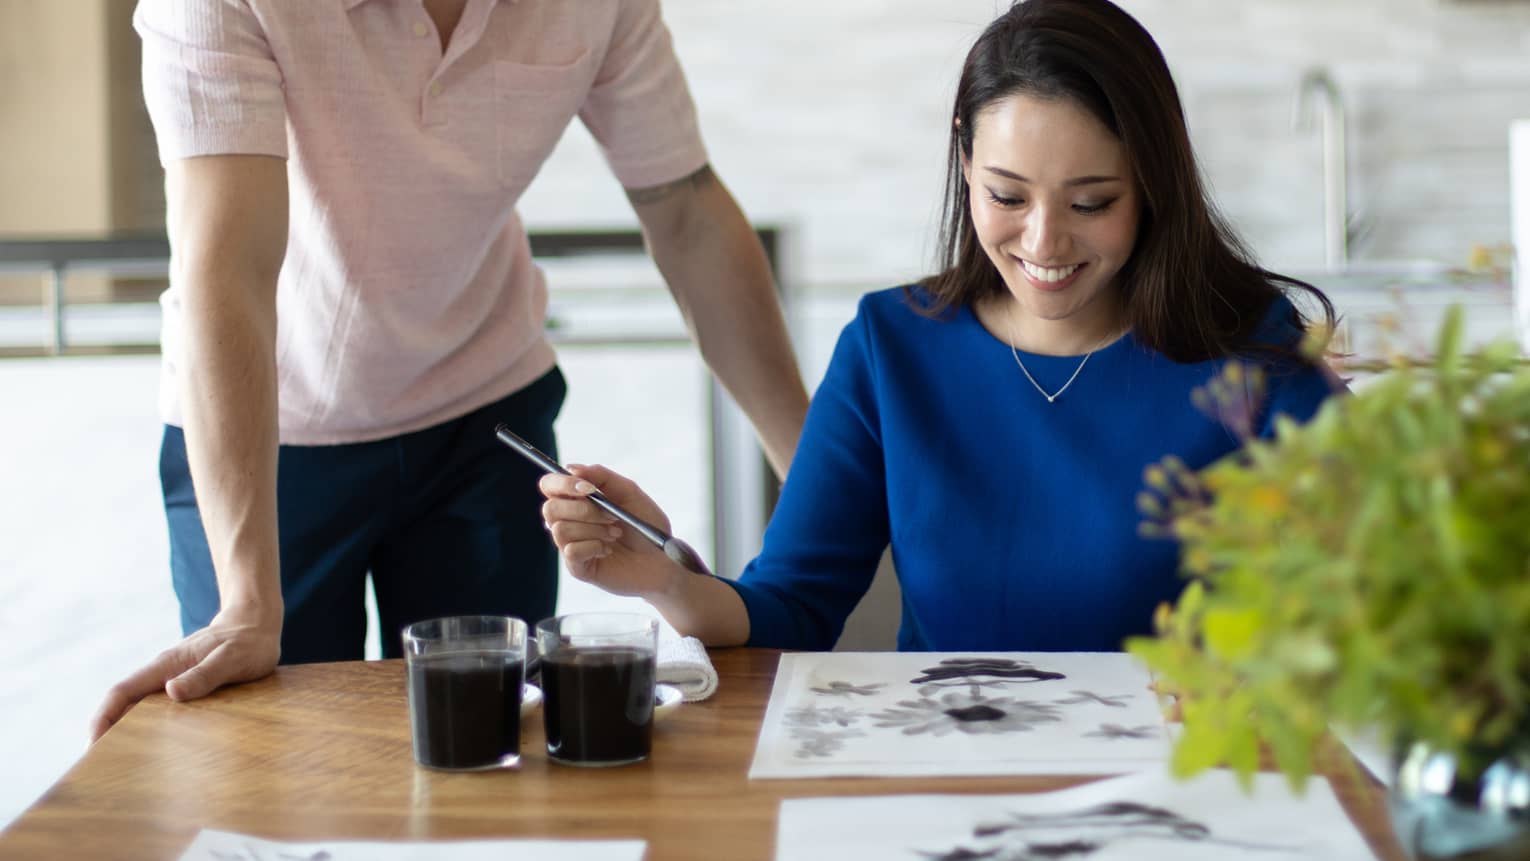 Smiling woman at table participates in Japanese ink wash painting while man stands over her should looking on